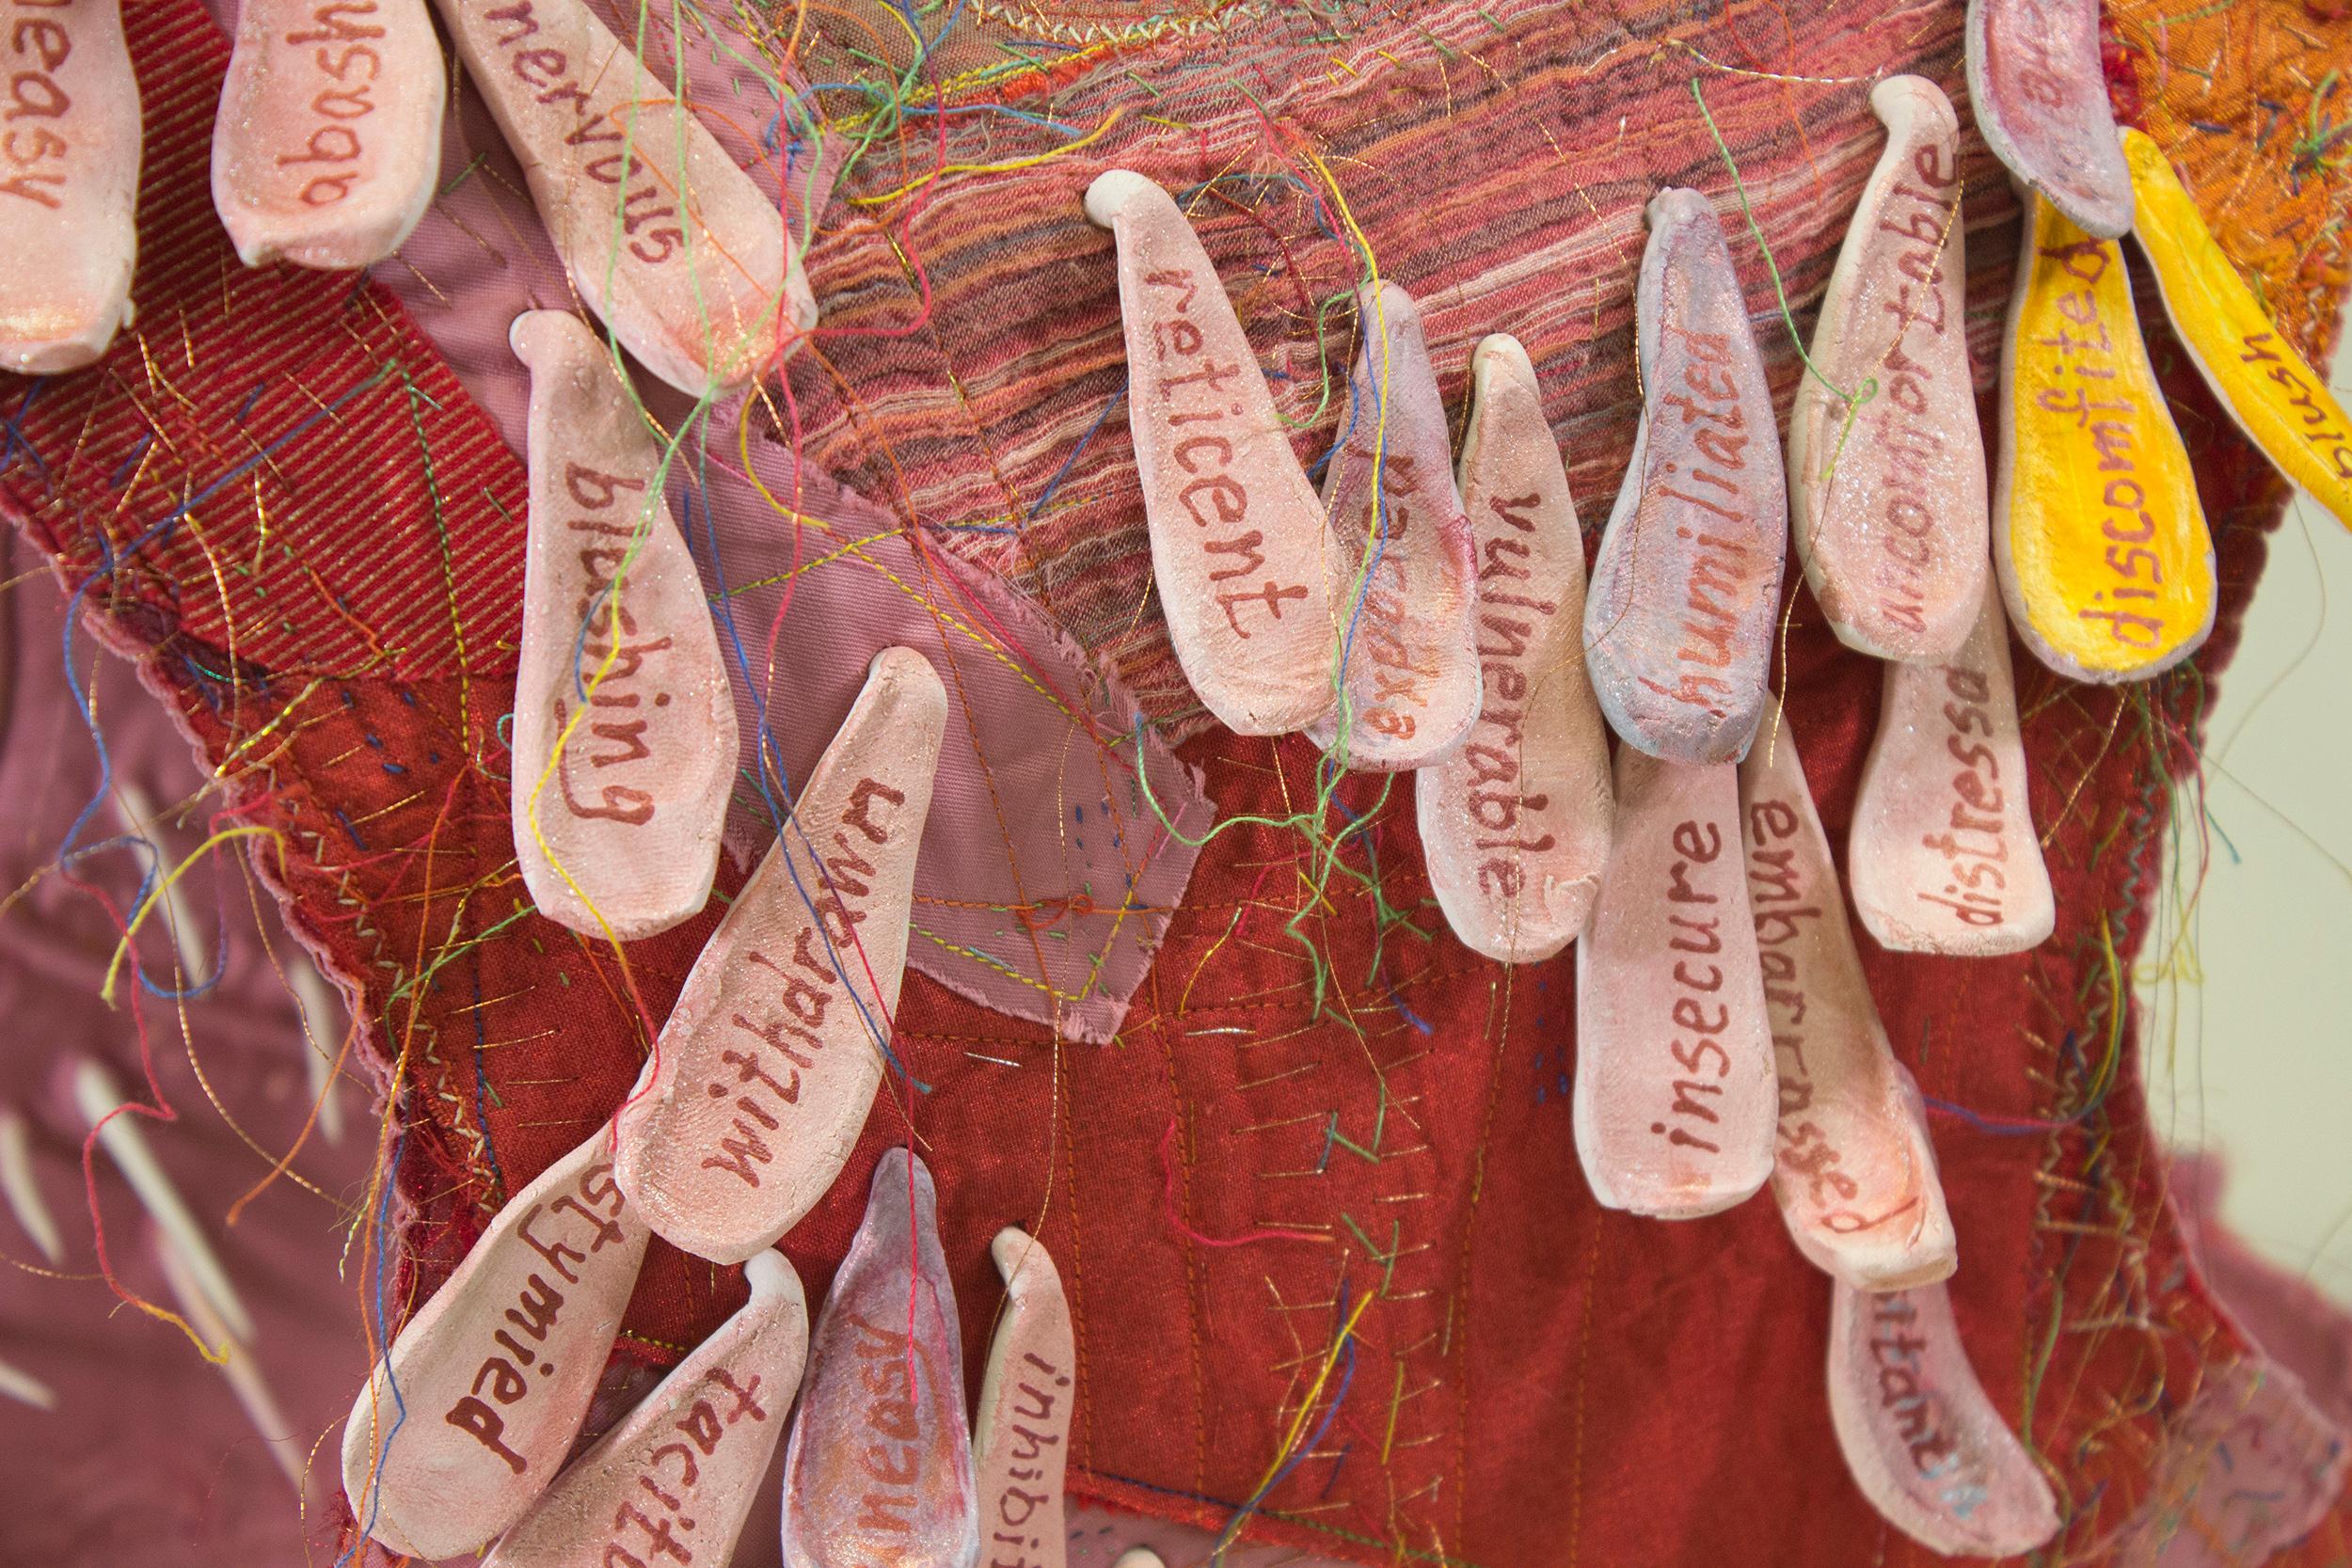 Virginia Mahoney’s “Blush” is a mixed-media sculpture in vest form that is pink, red, and orange, with attached ceramic tags on which words referring to embarrassment are handwritten. Ceramic spikes projecting inside emphasize discomfort, and